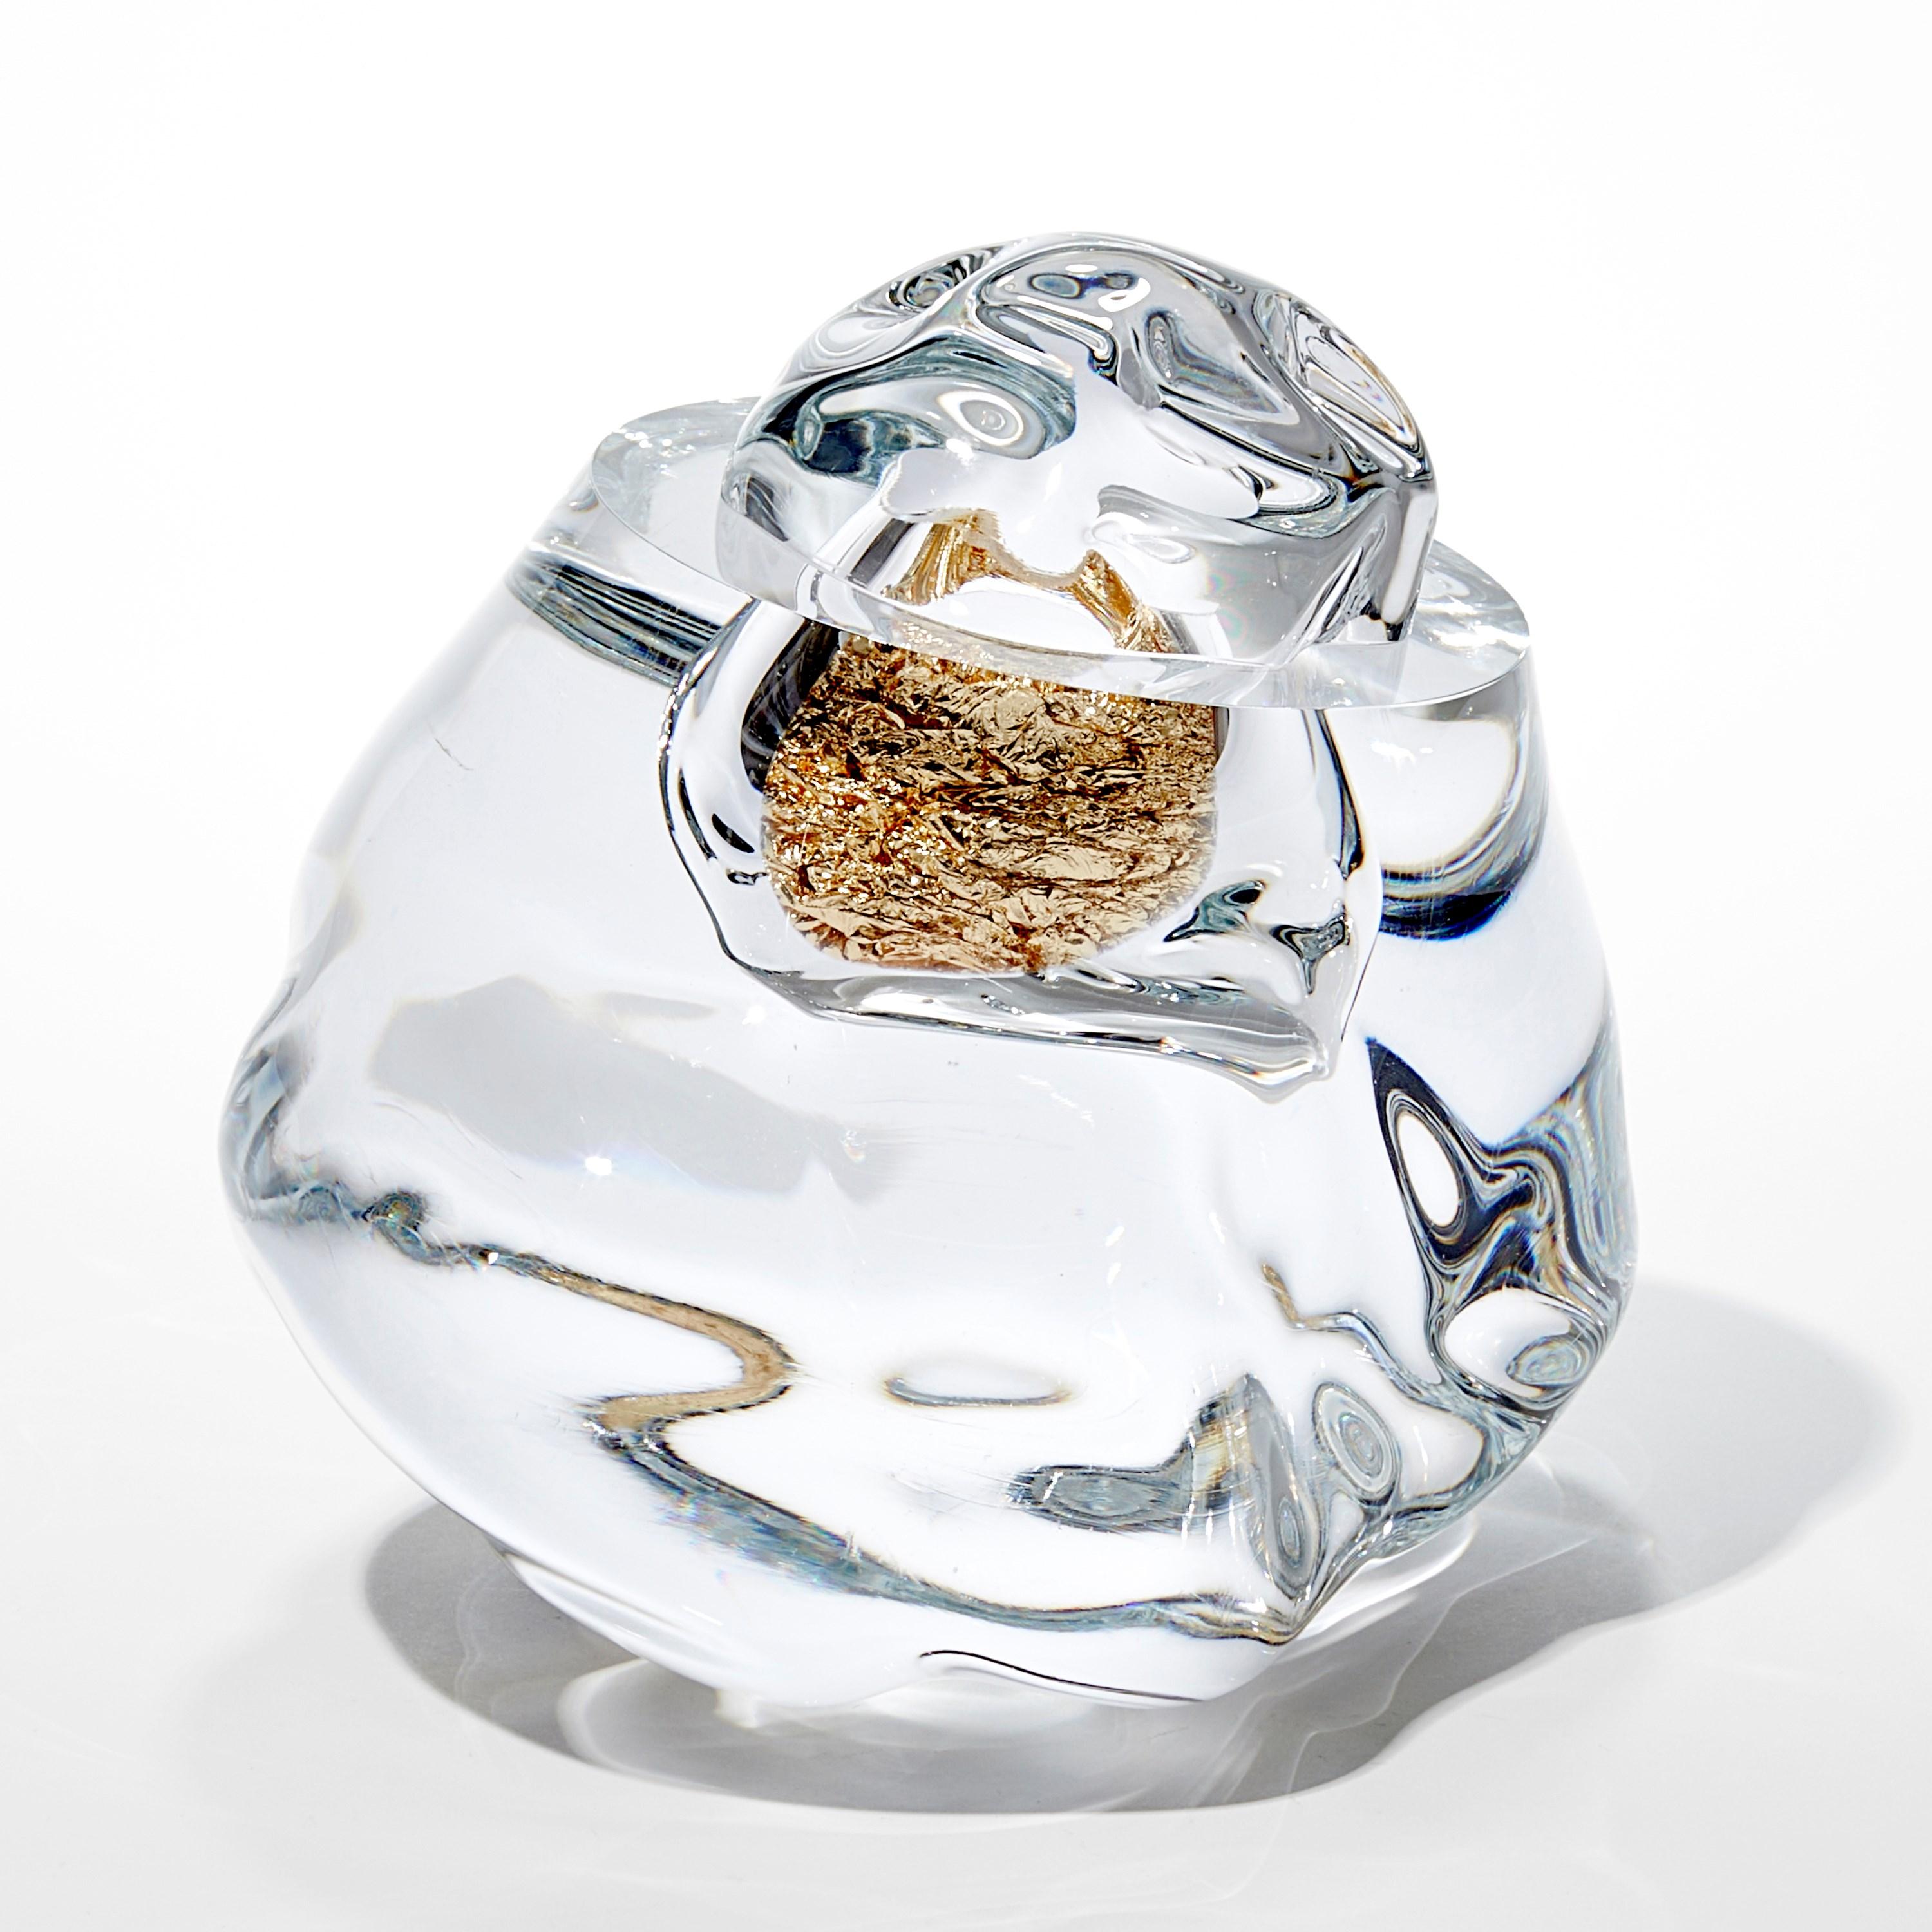 Hand-Crafted Erratic L with 23ct Red Gold, amorphic optical glass sculpture by Anthony Scala